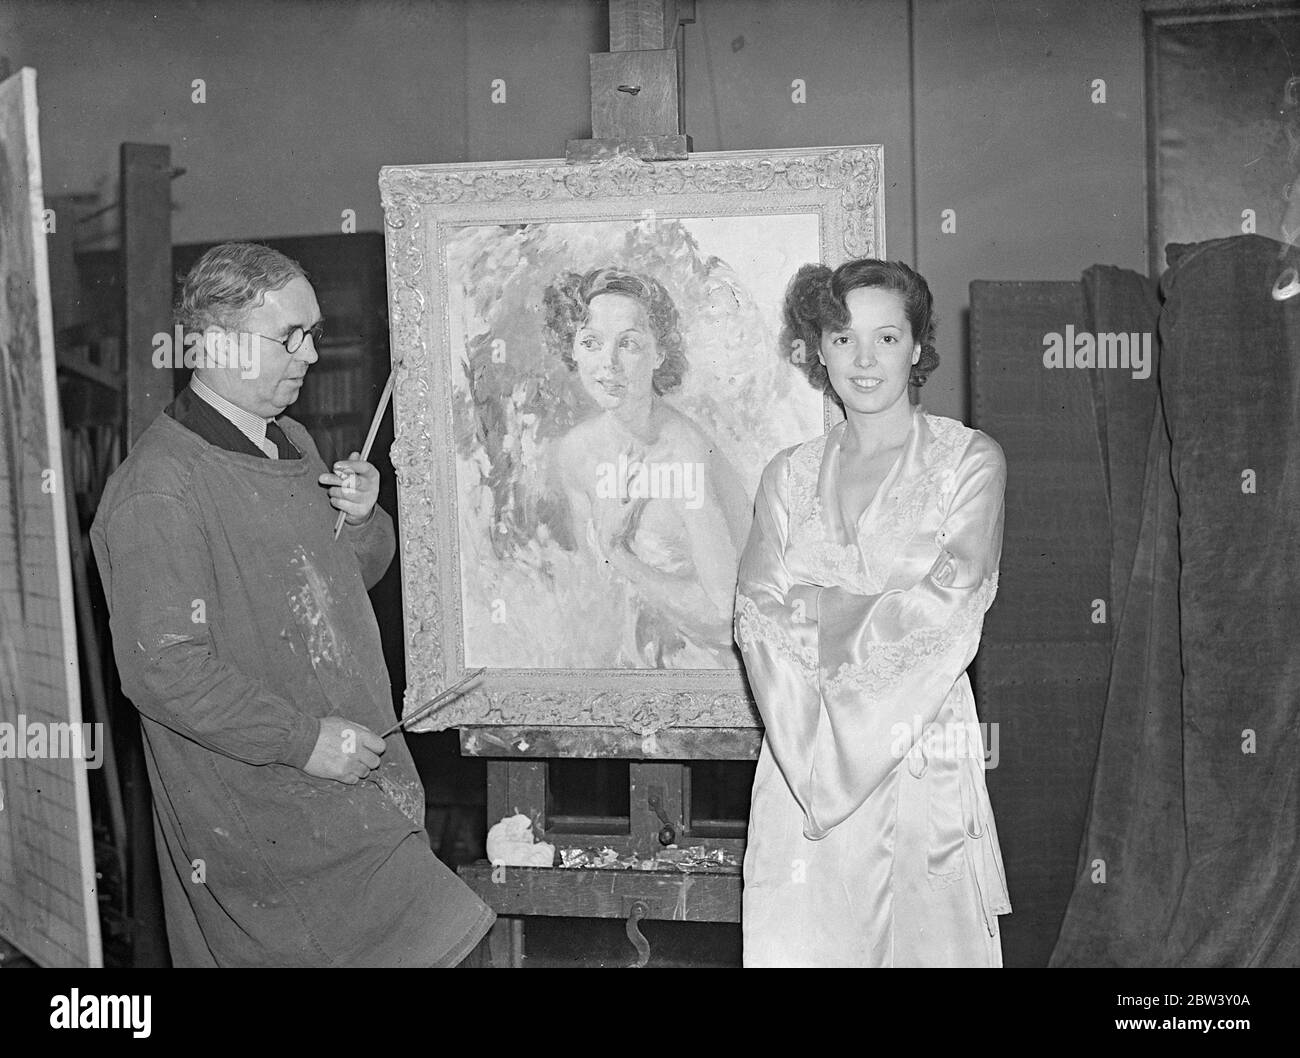 Jessie Matthew ' s portrait for Royal Academy . A portrait of Miss Jessie Matthews , the stage and film actress is being painted by Mr T C Dugdale , ARA , at his London studios , for entry in this year ' s Royal Academy . The actress is pictured against a woodland background . Photo shows , Miss Jessie Matthews with her portrait on which Mr TC Dugdale is working at his London studios . 10 March 1937 Stock Photo